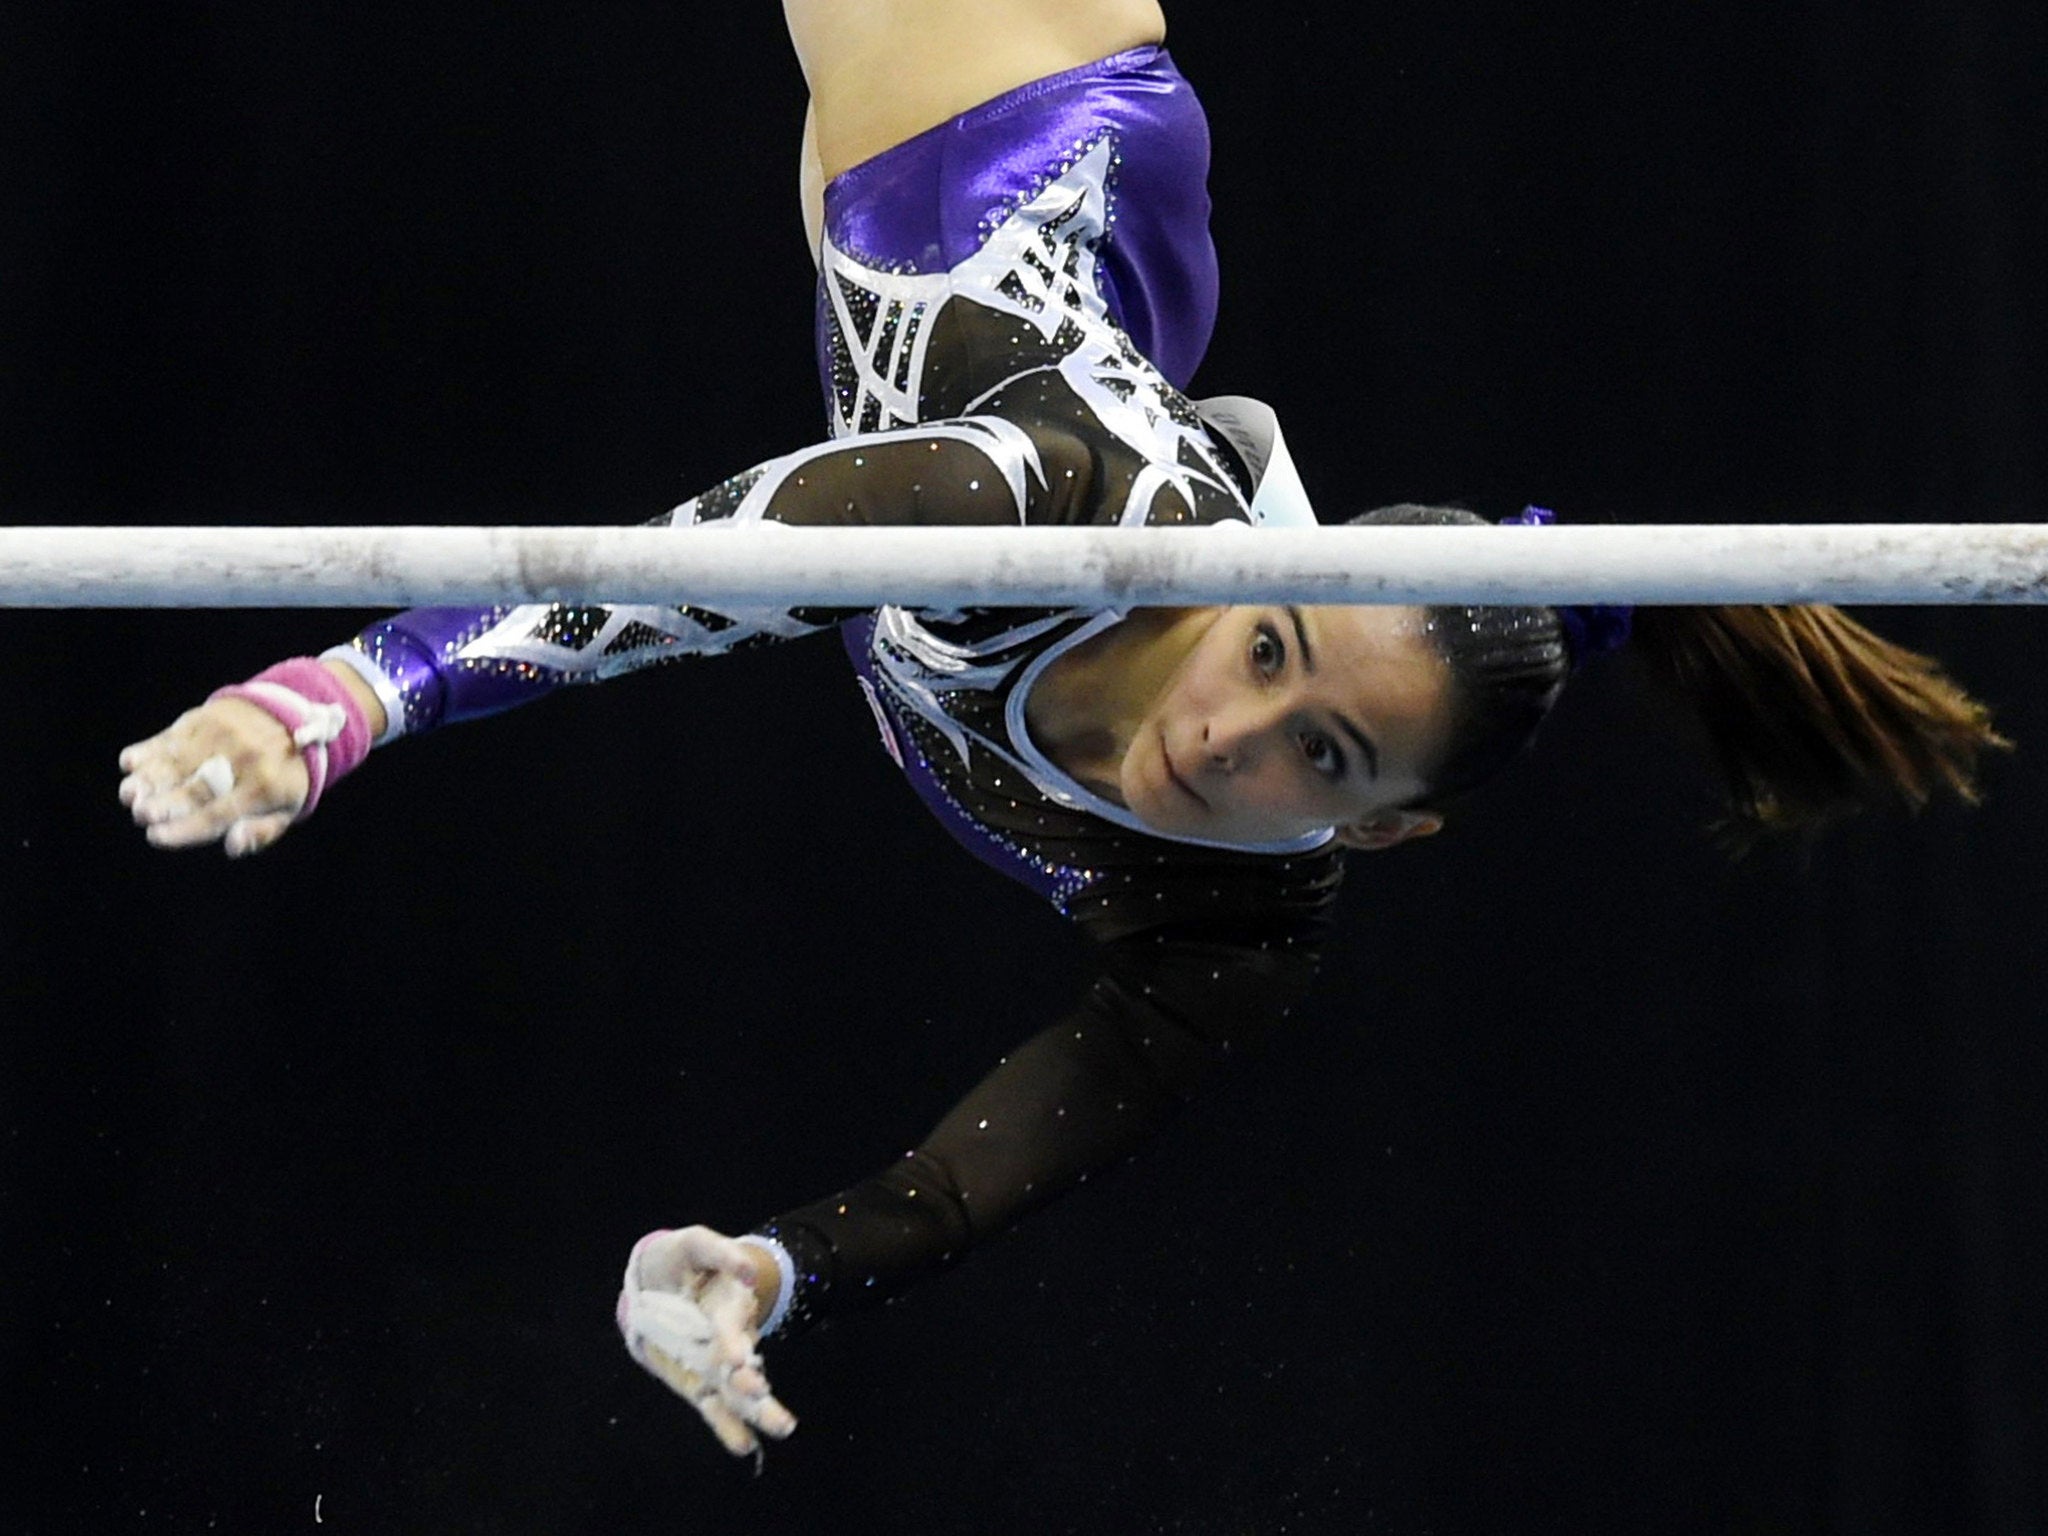 Malaysia's Farah Ann Abdul Hadi competes on the uneven bars during the women's individual all-around gymnastics final at the SEA Games, where she took home six medals, including two golds 